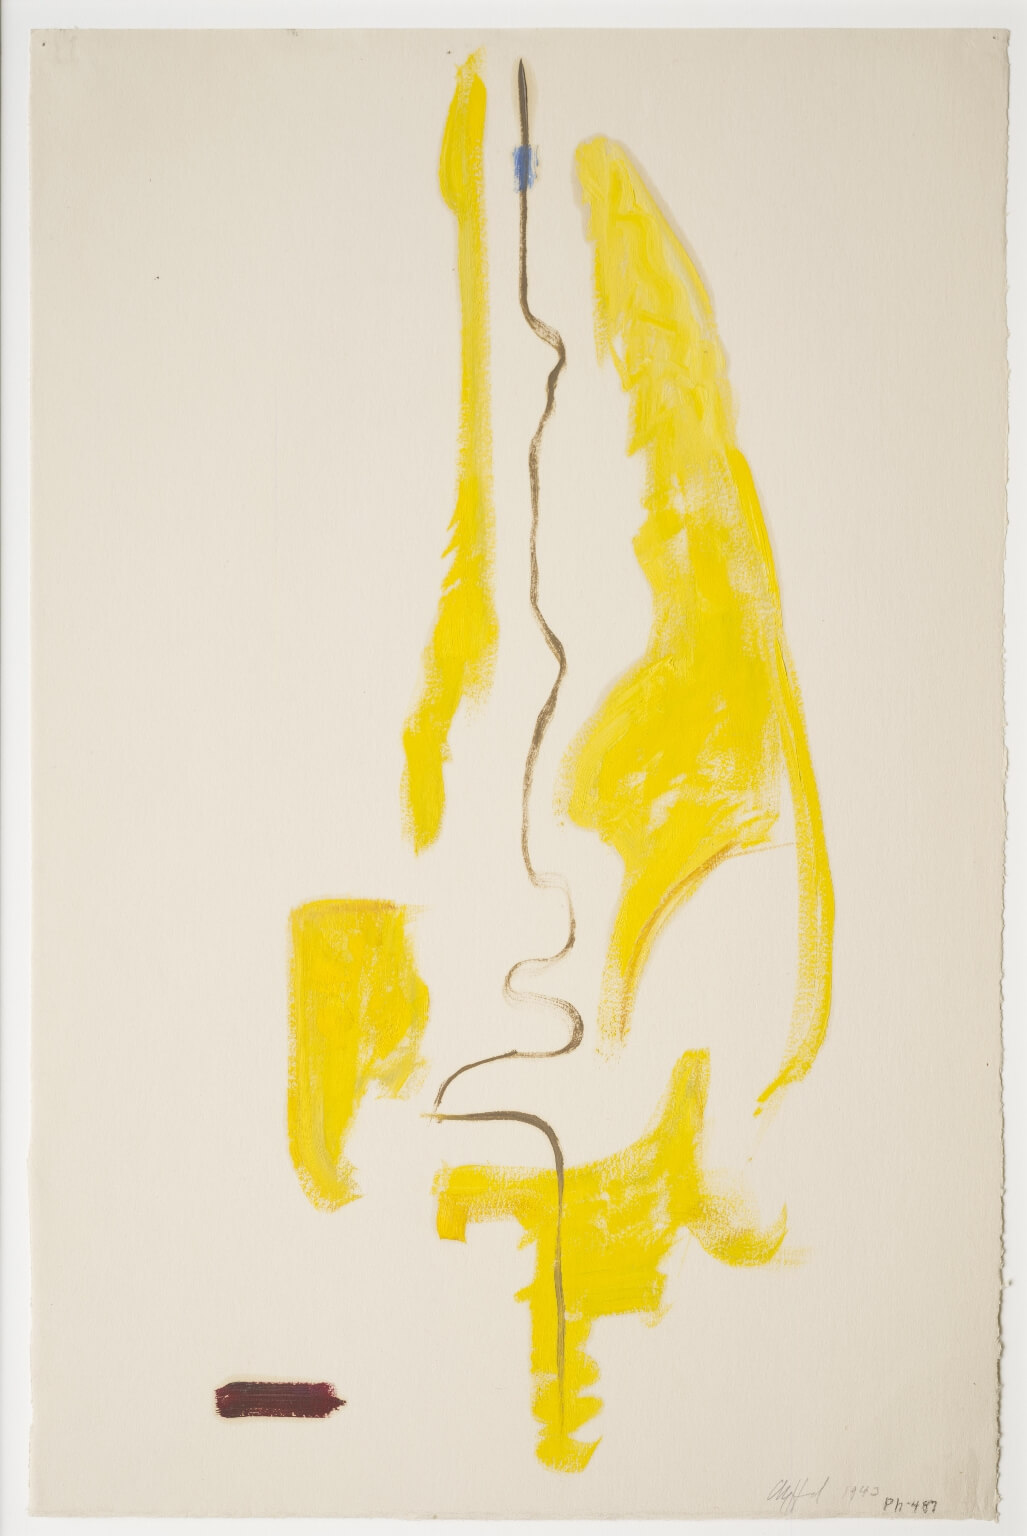 Oil painting on paper with bare paper showing and yellow and brown paint in abstract vertical shapes